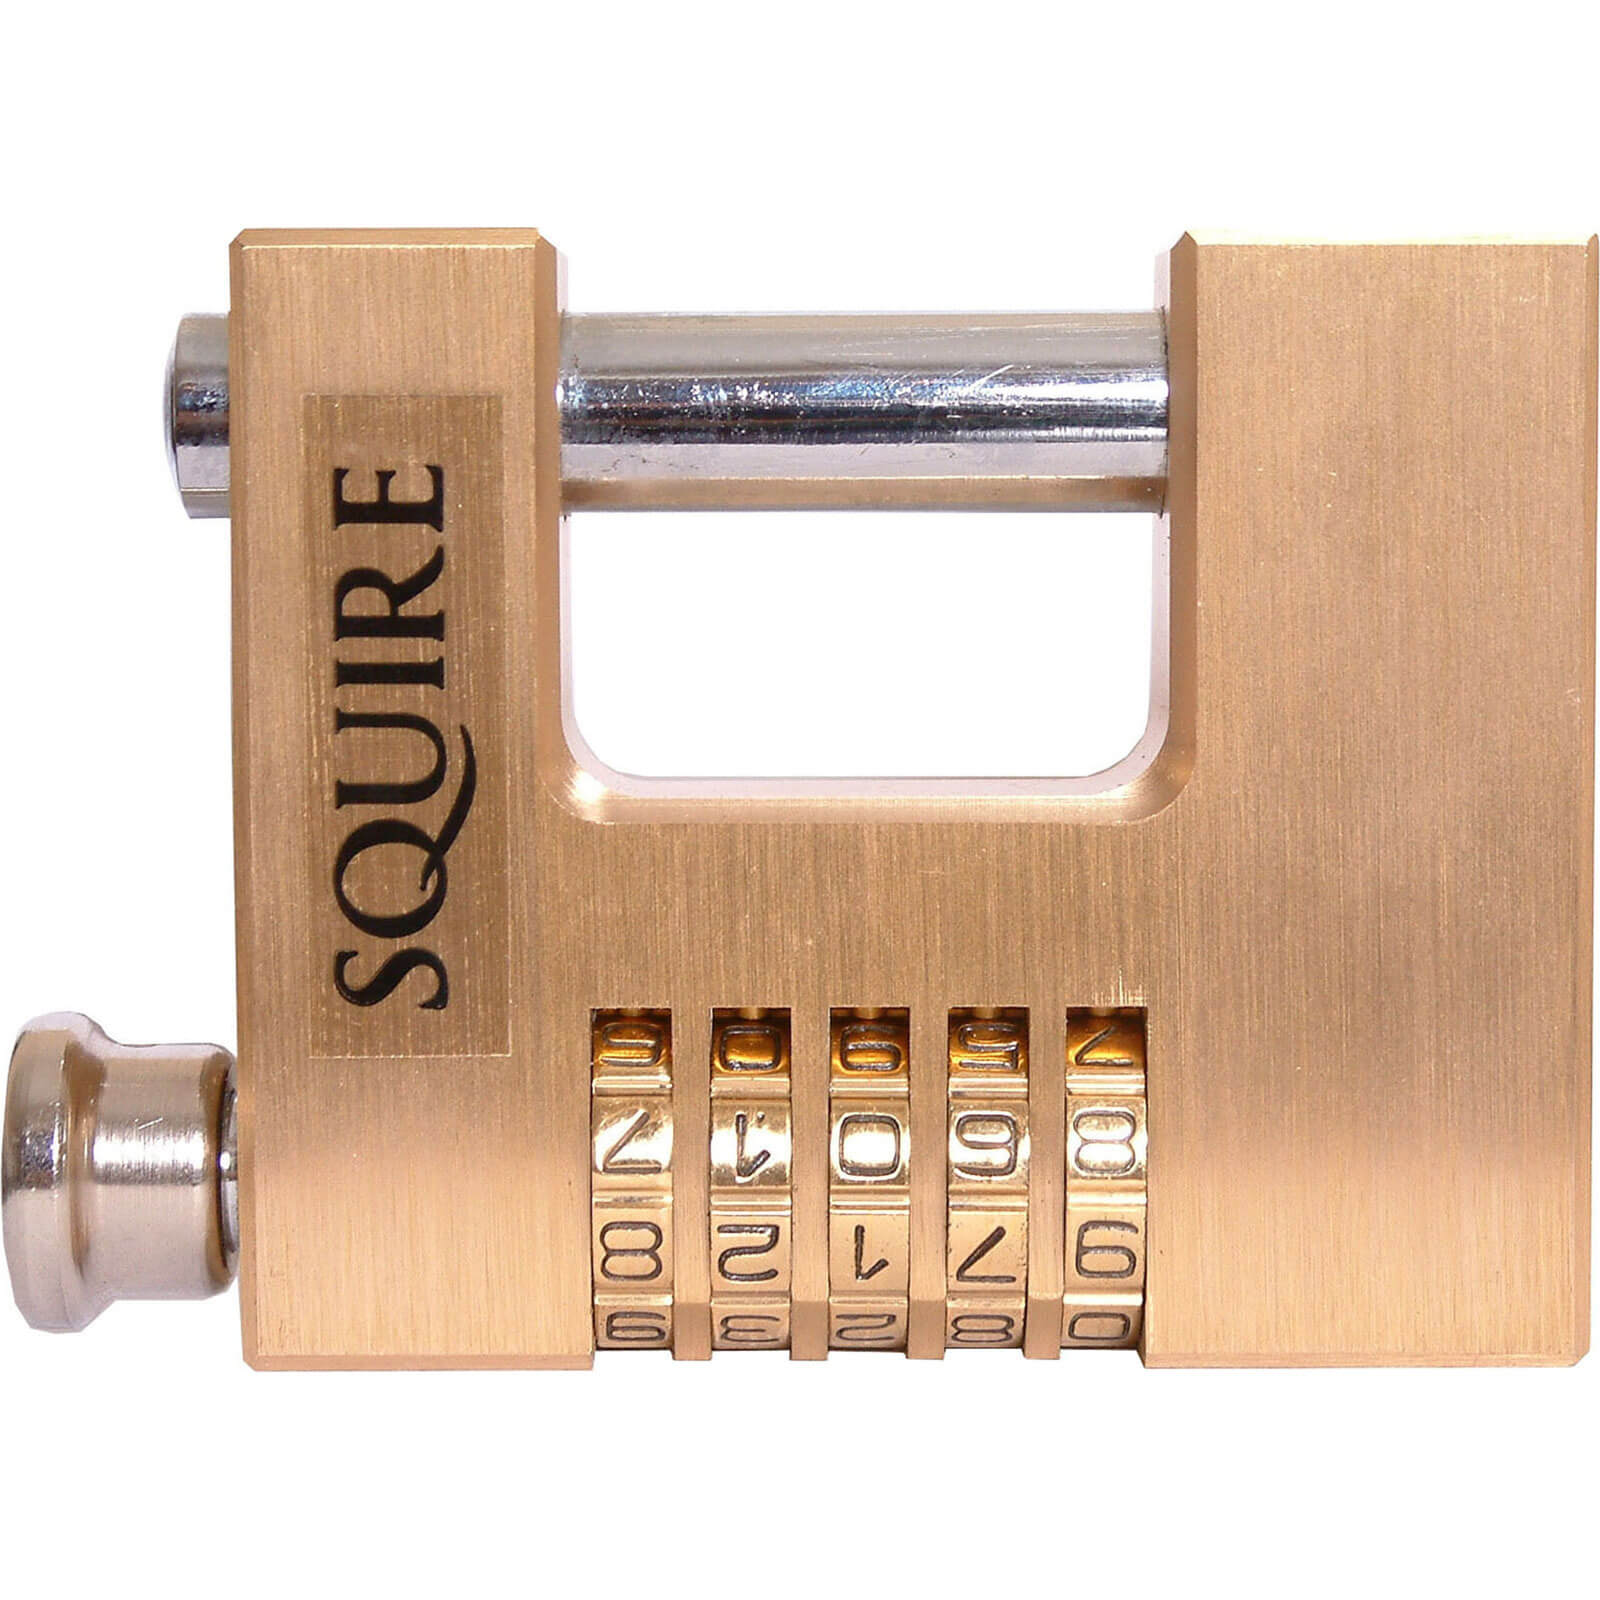 Image of Henry Squire Hi-Security Shutter Combination Padlock 85mm Standard